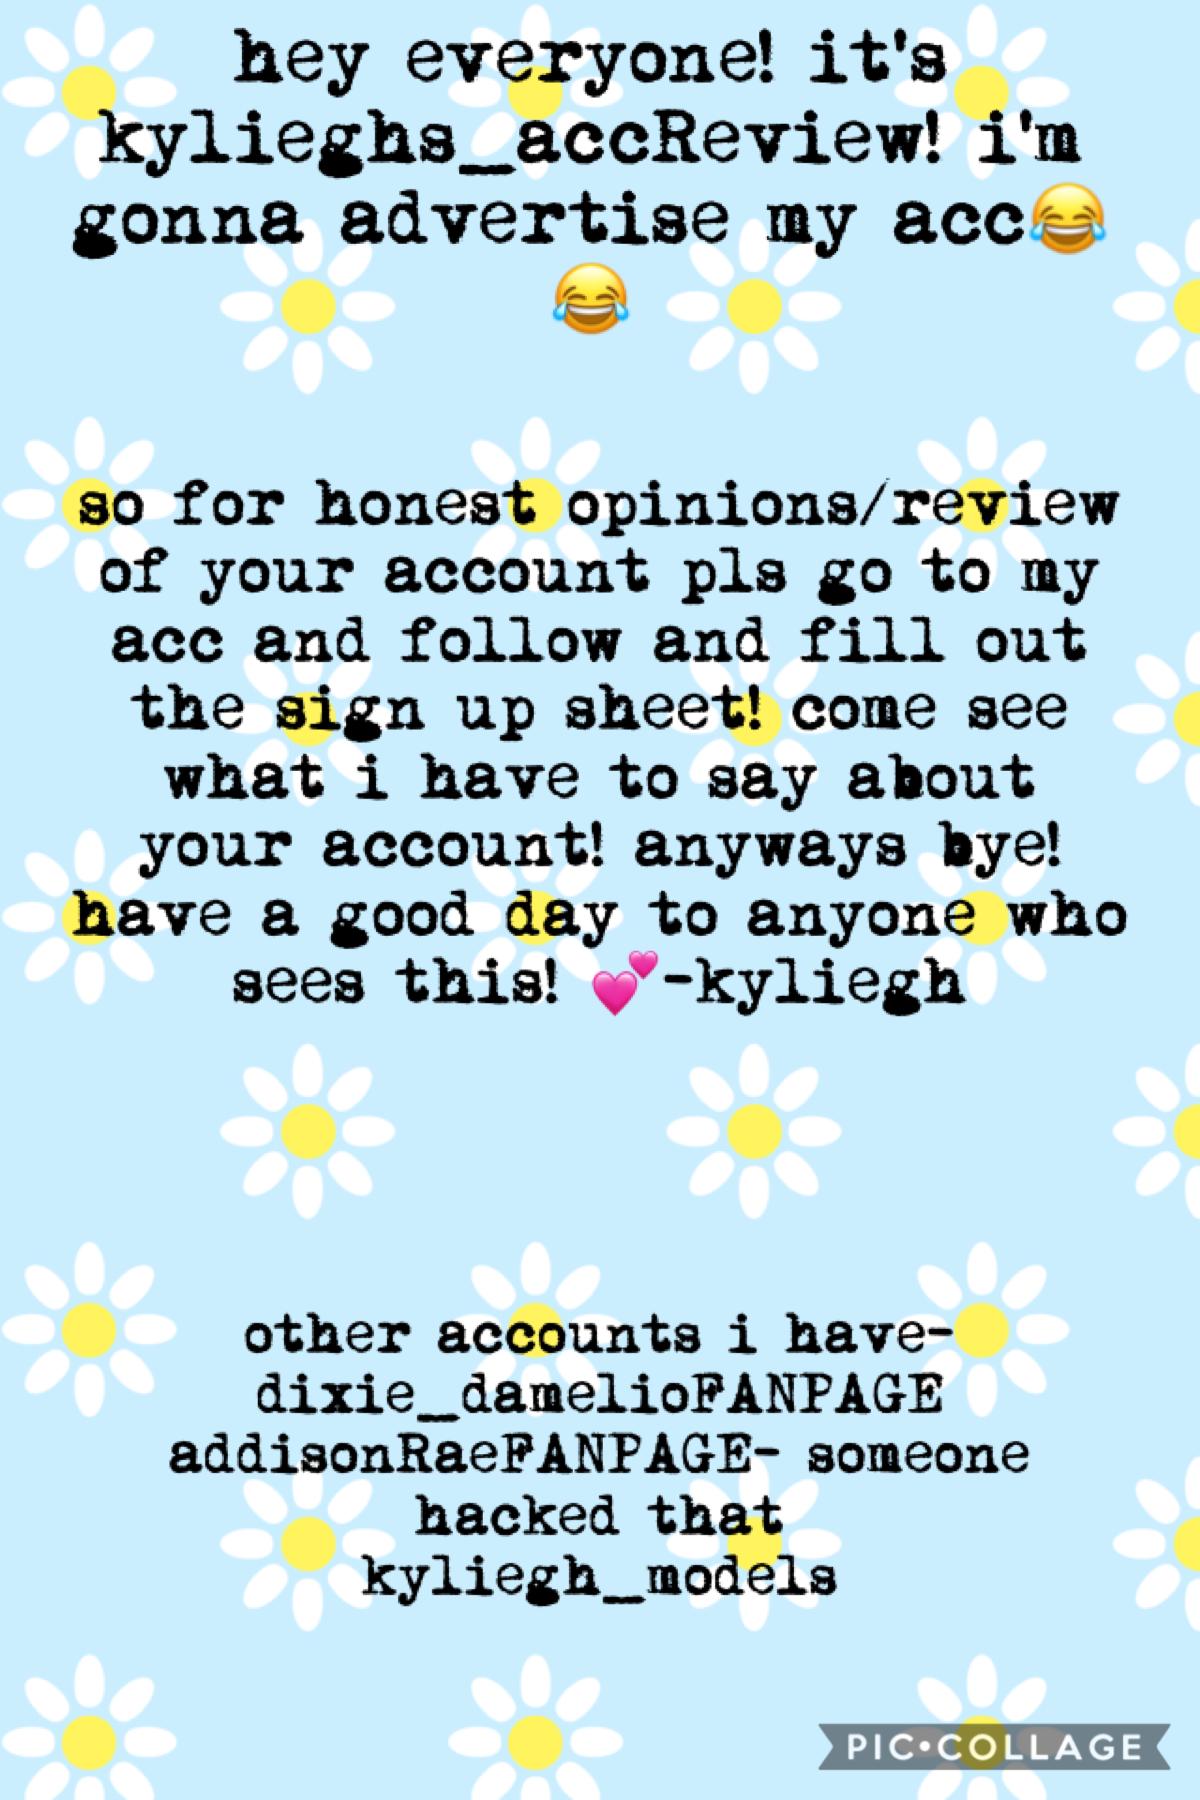 go follow and fill out a acc review sheet @kylieghs_accReview 